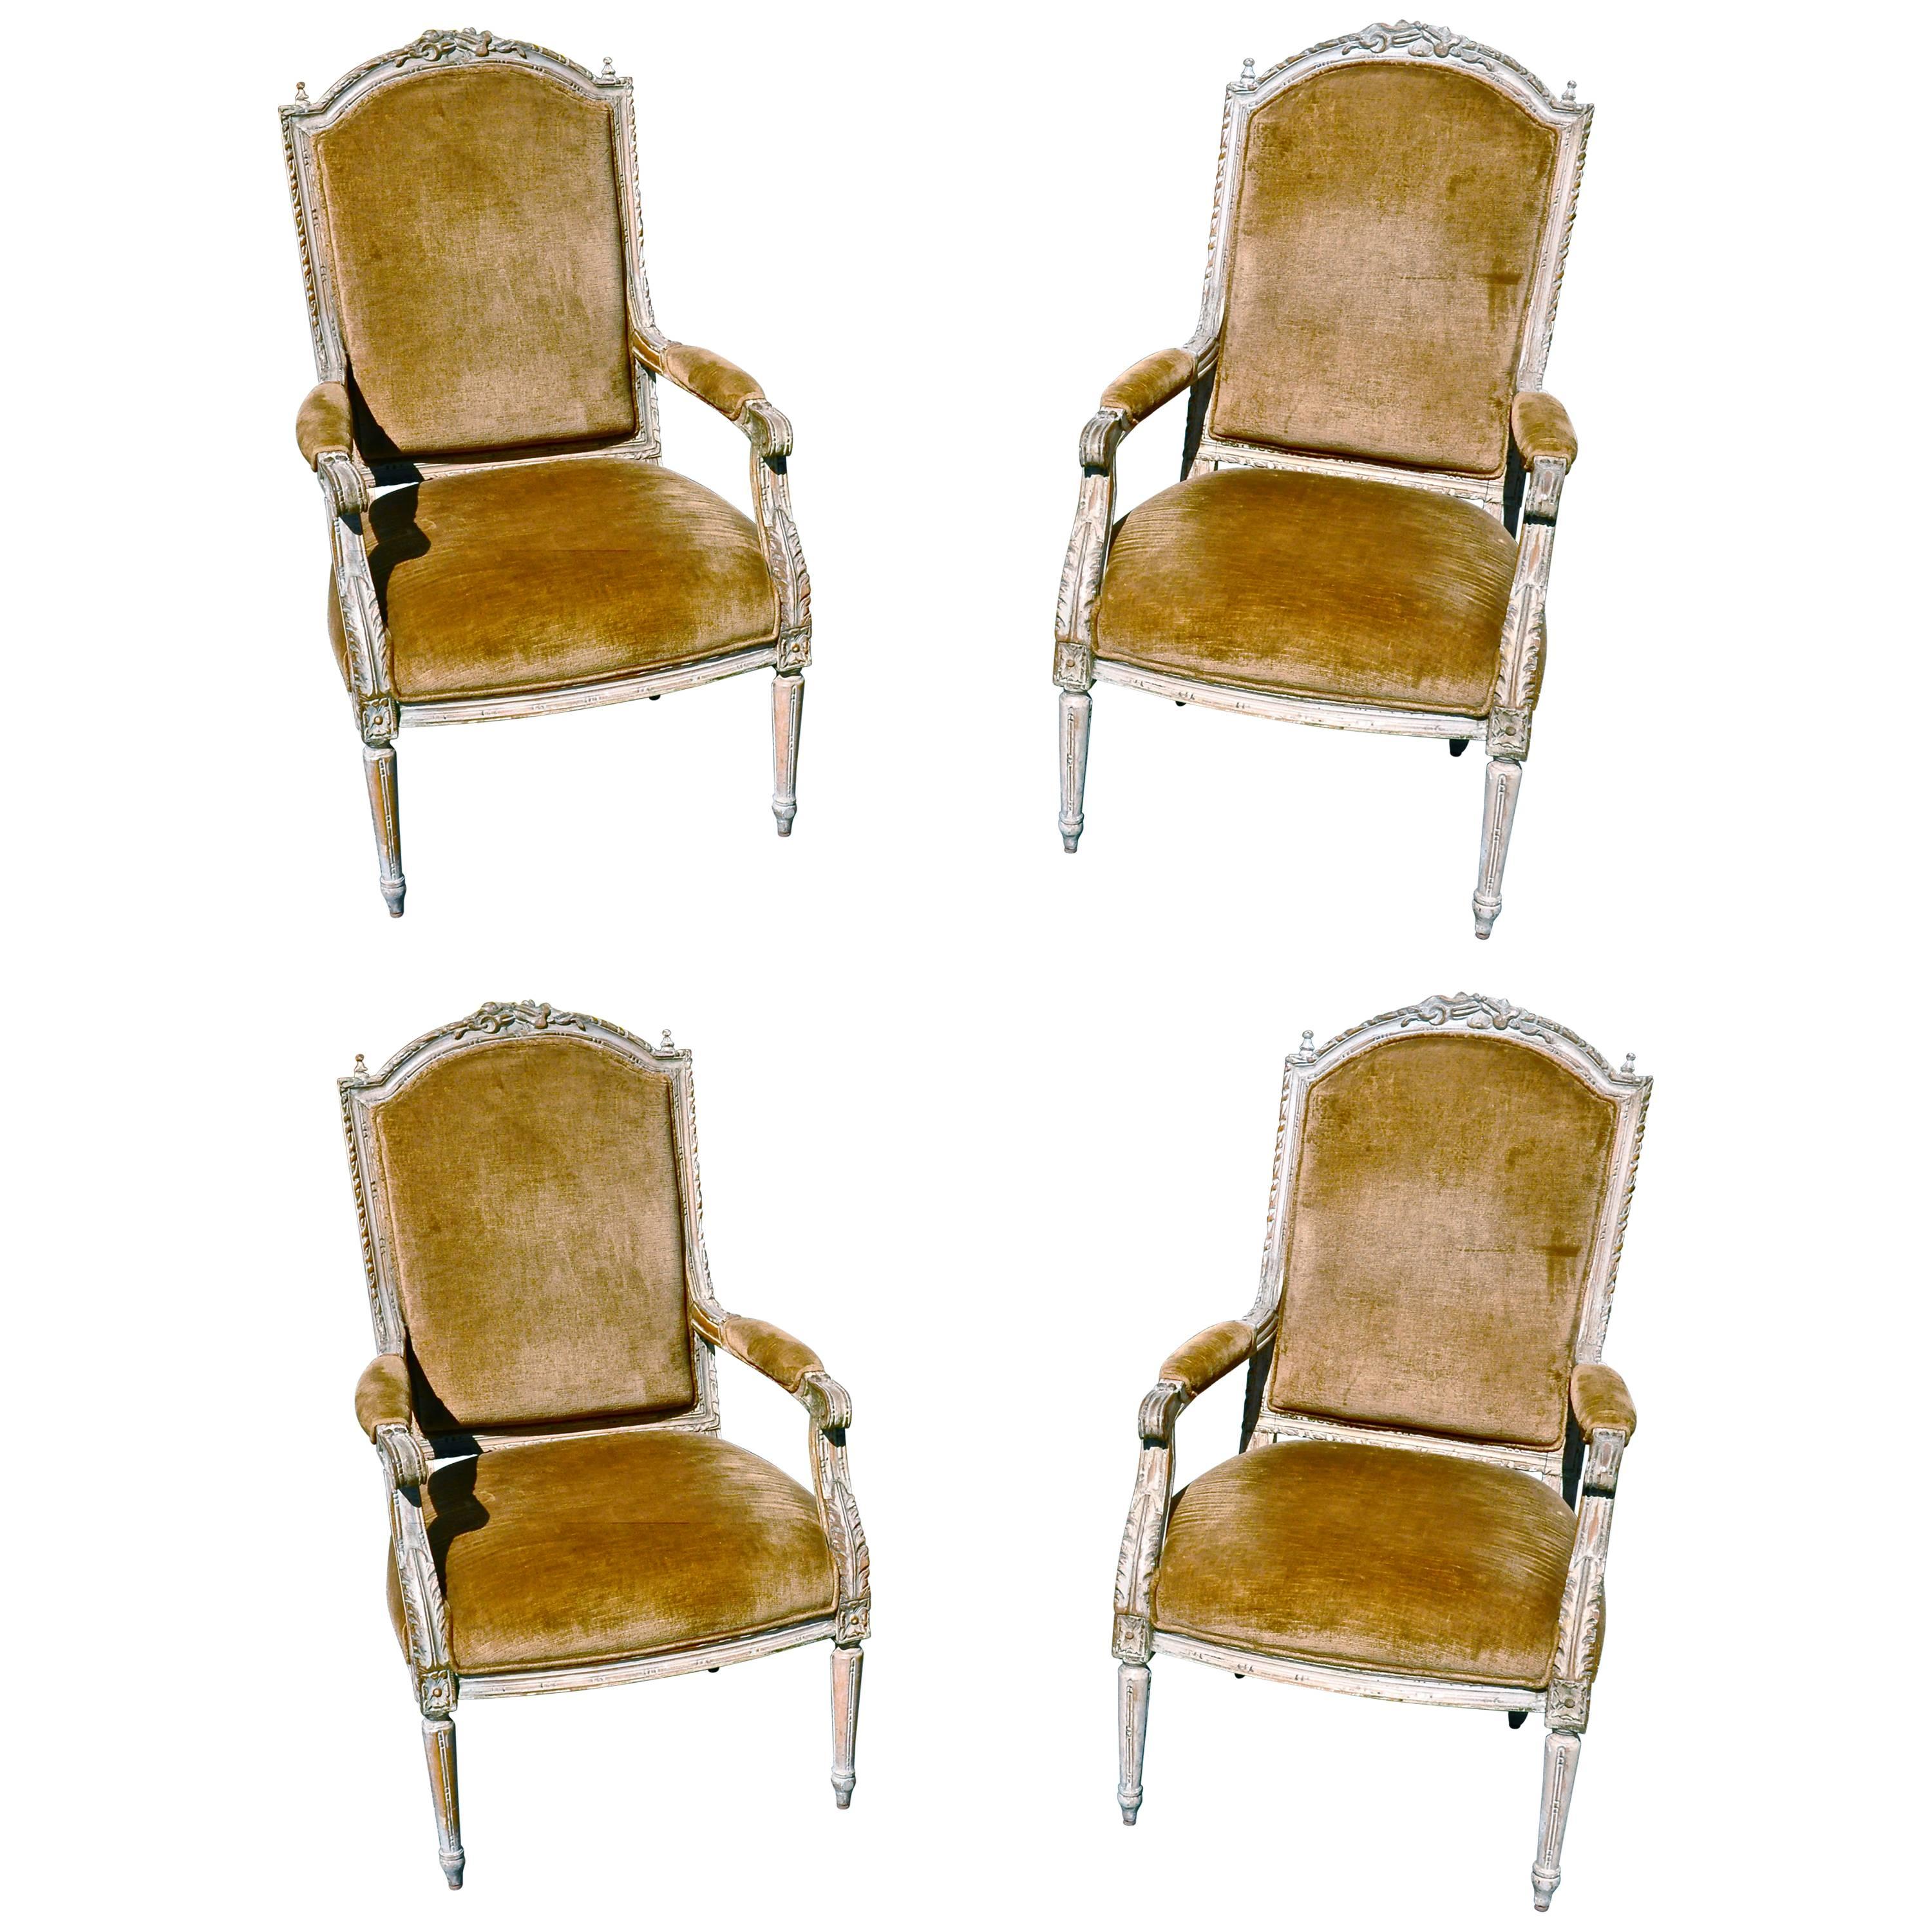 Four Chairs of Italian 19th Century Neoclassical Armchairs